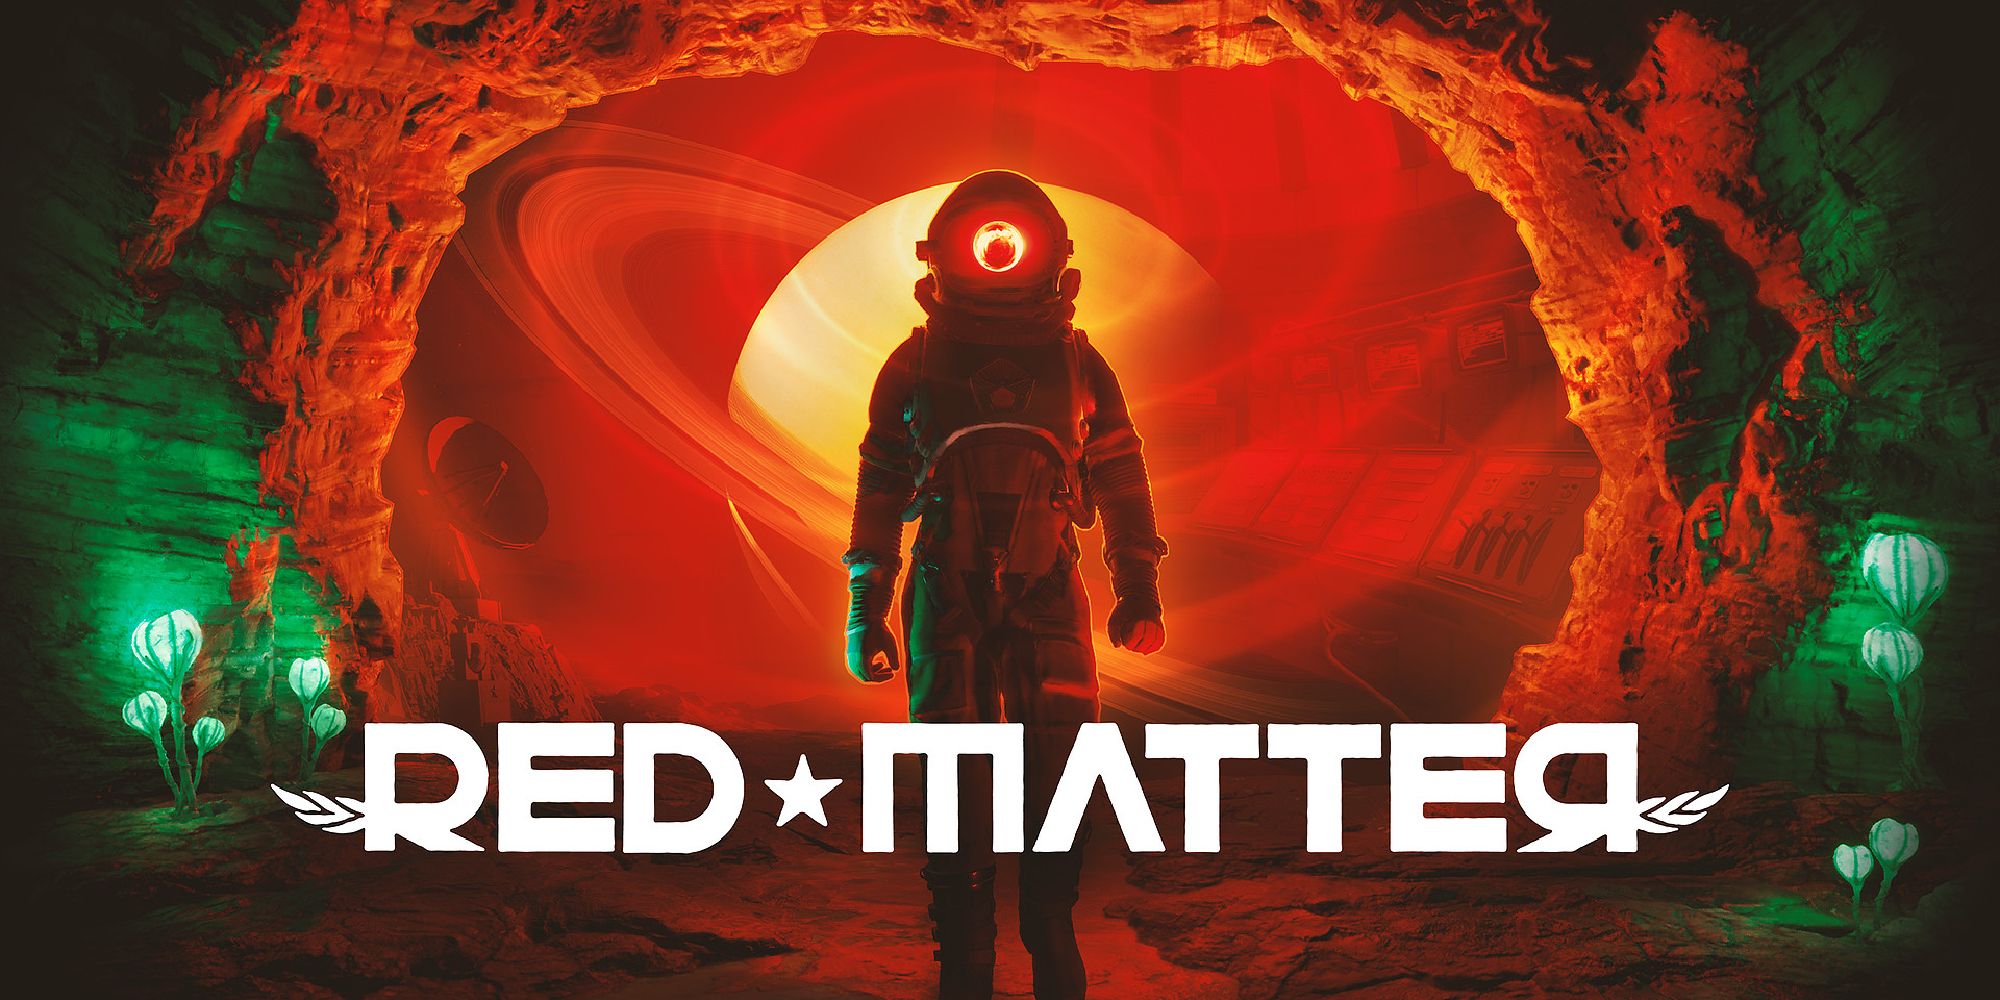 Best Puzzle VR Games a mysterious astronaut stood in a surreal alien landscape with the game's name, Red Matter, beneath them